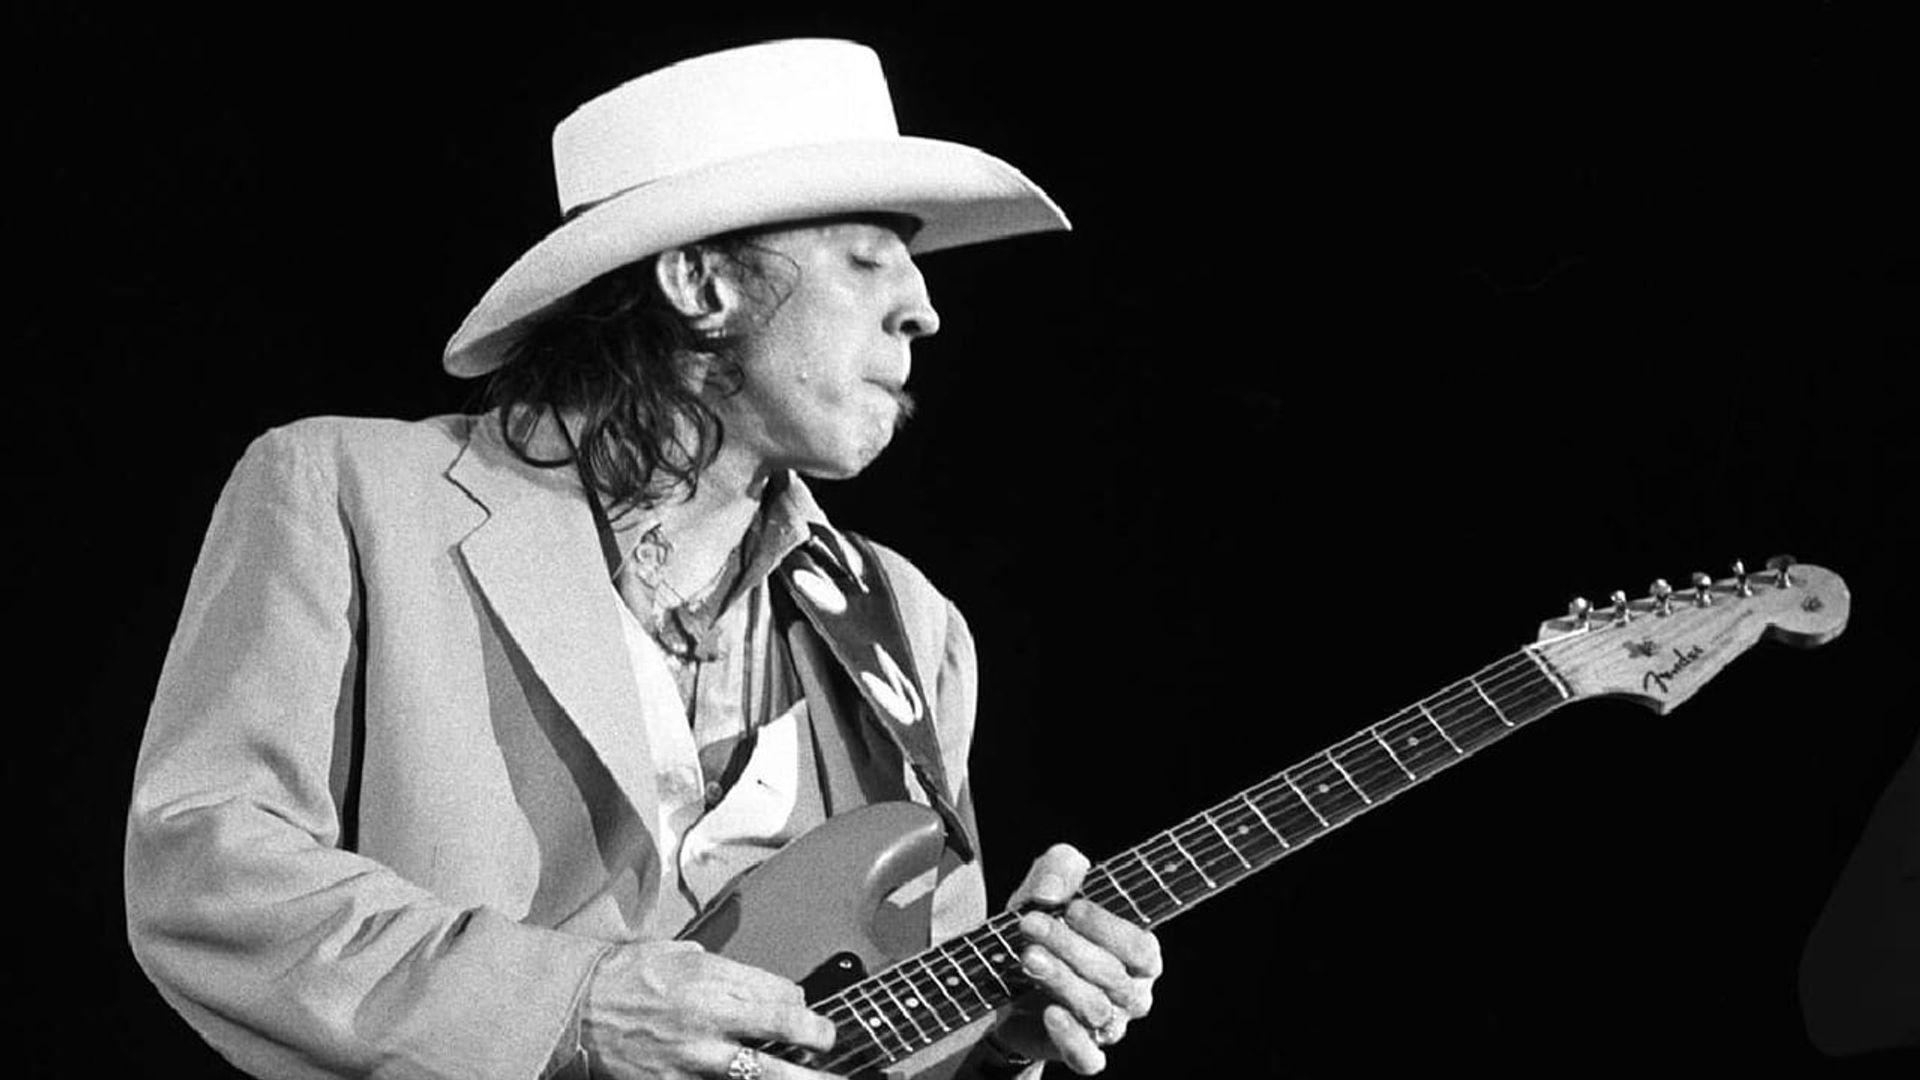 Rise of a Texas Bluesman: Stevie Ray Vaughan 1954-1983 background